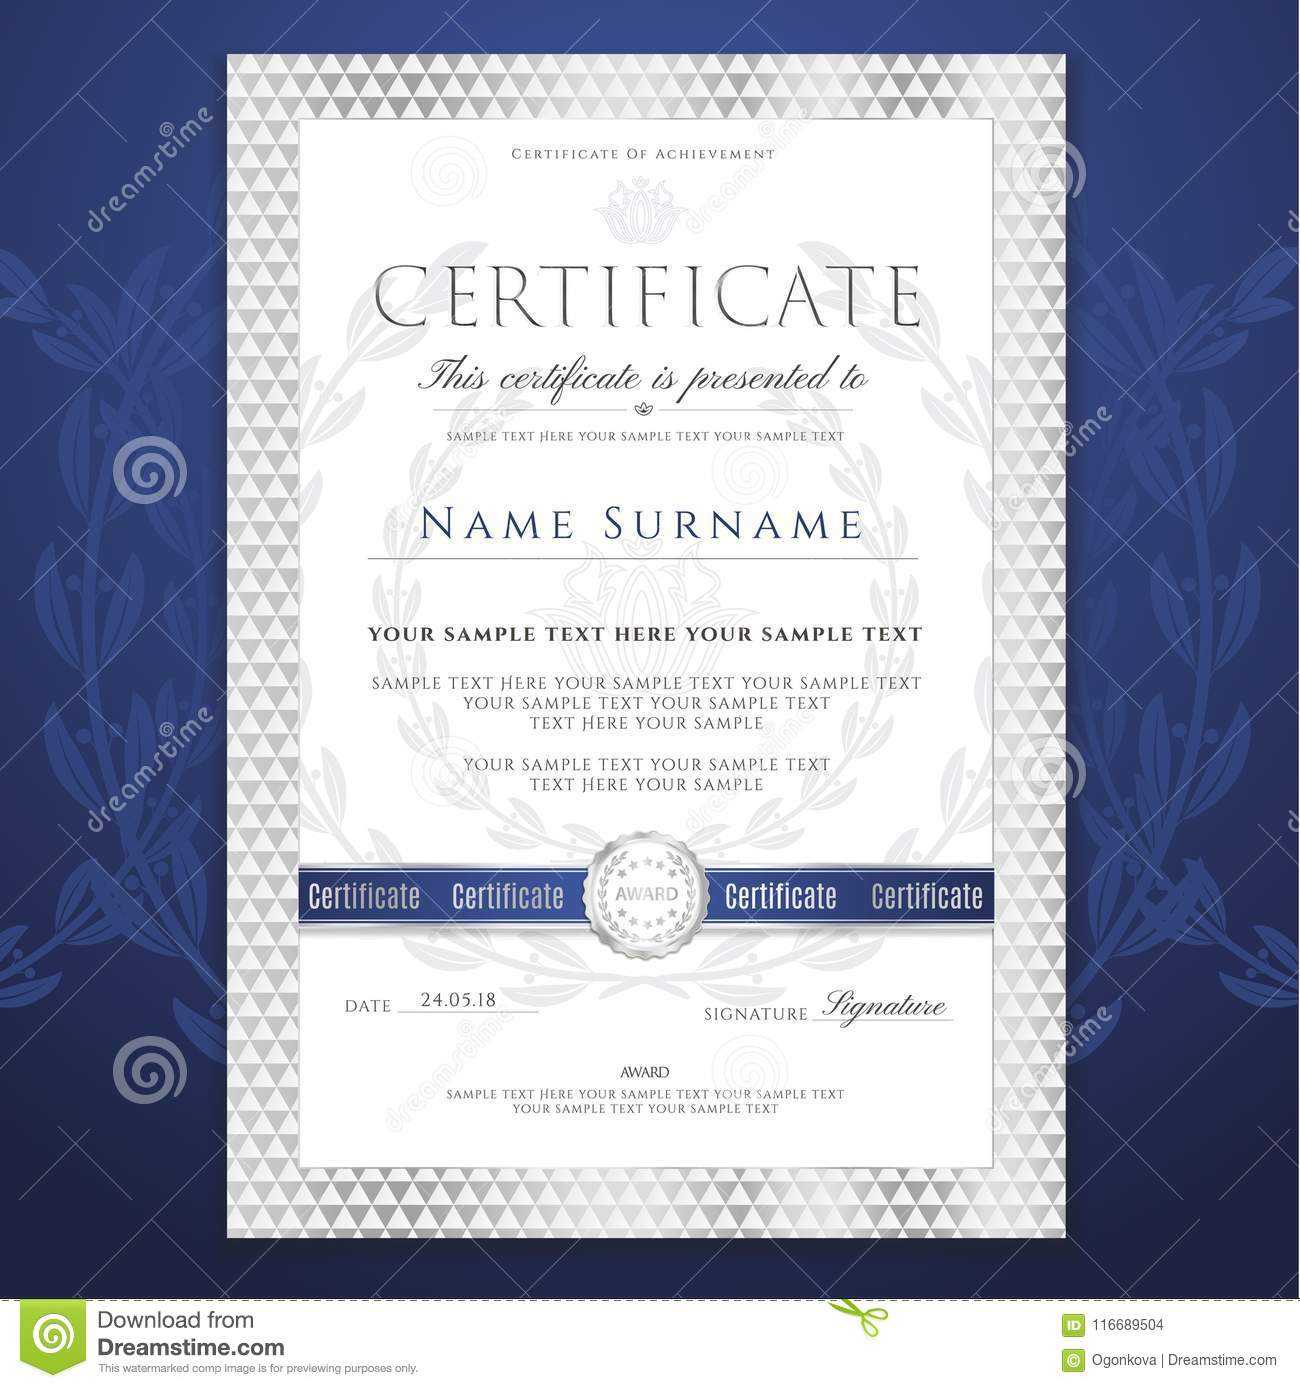 Certificate Template. Printable / Editable Design For With Academic Award Certificate Template